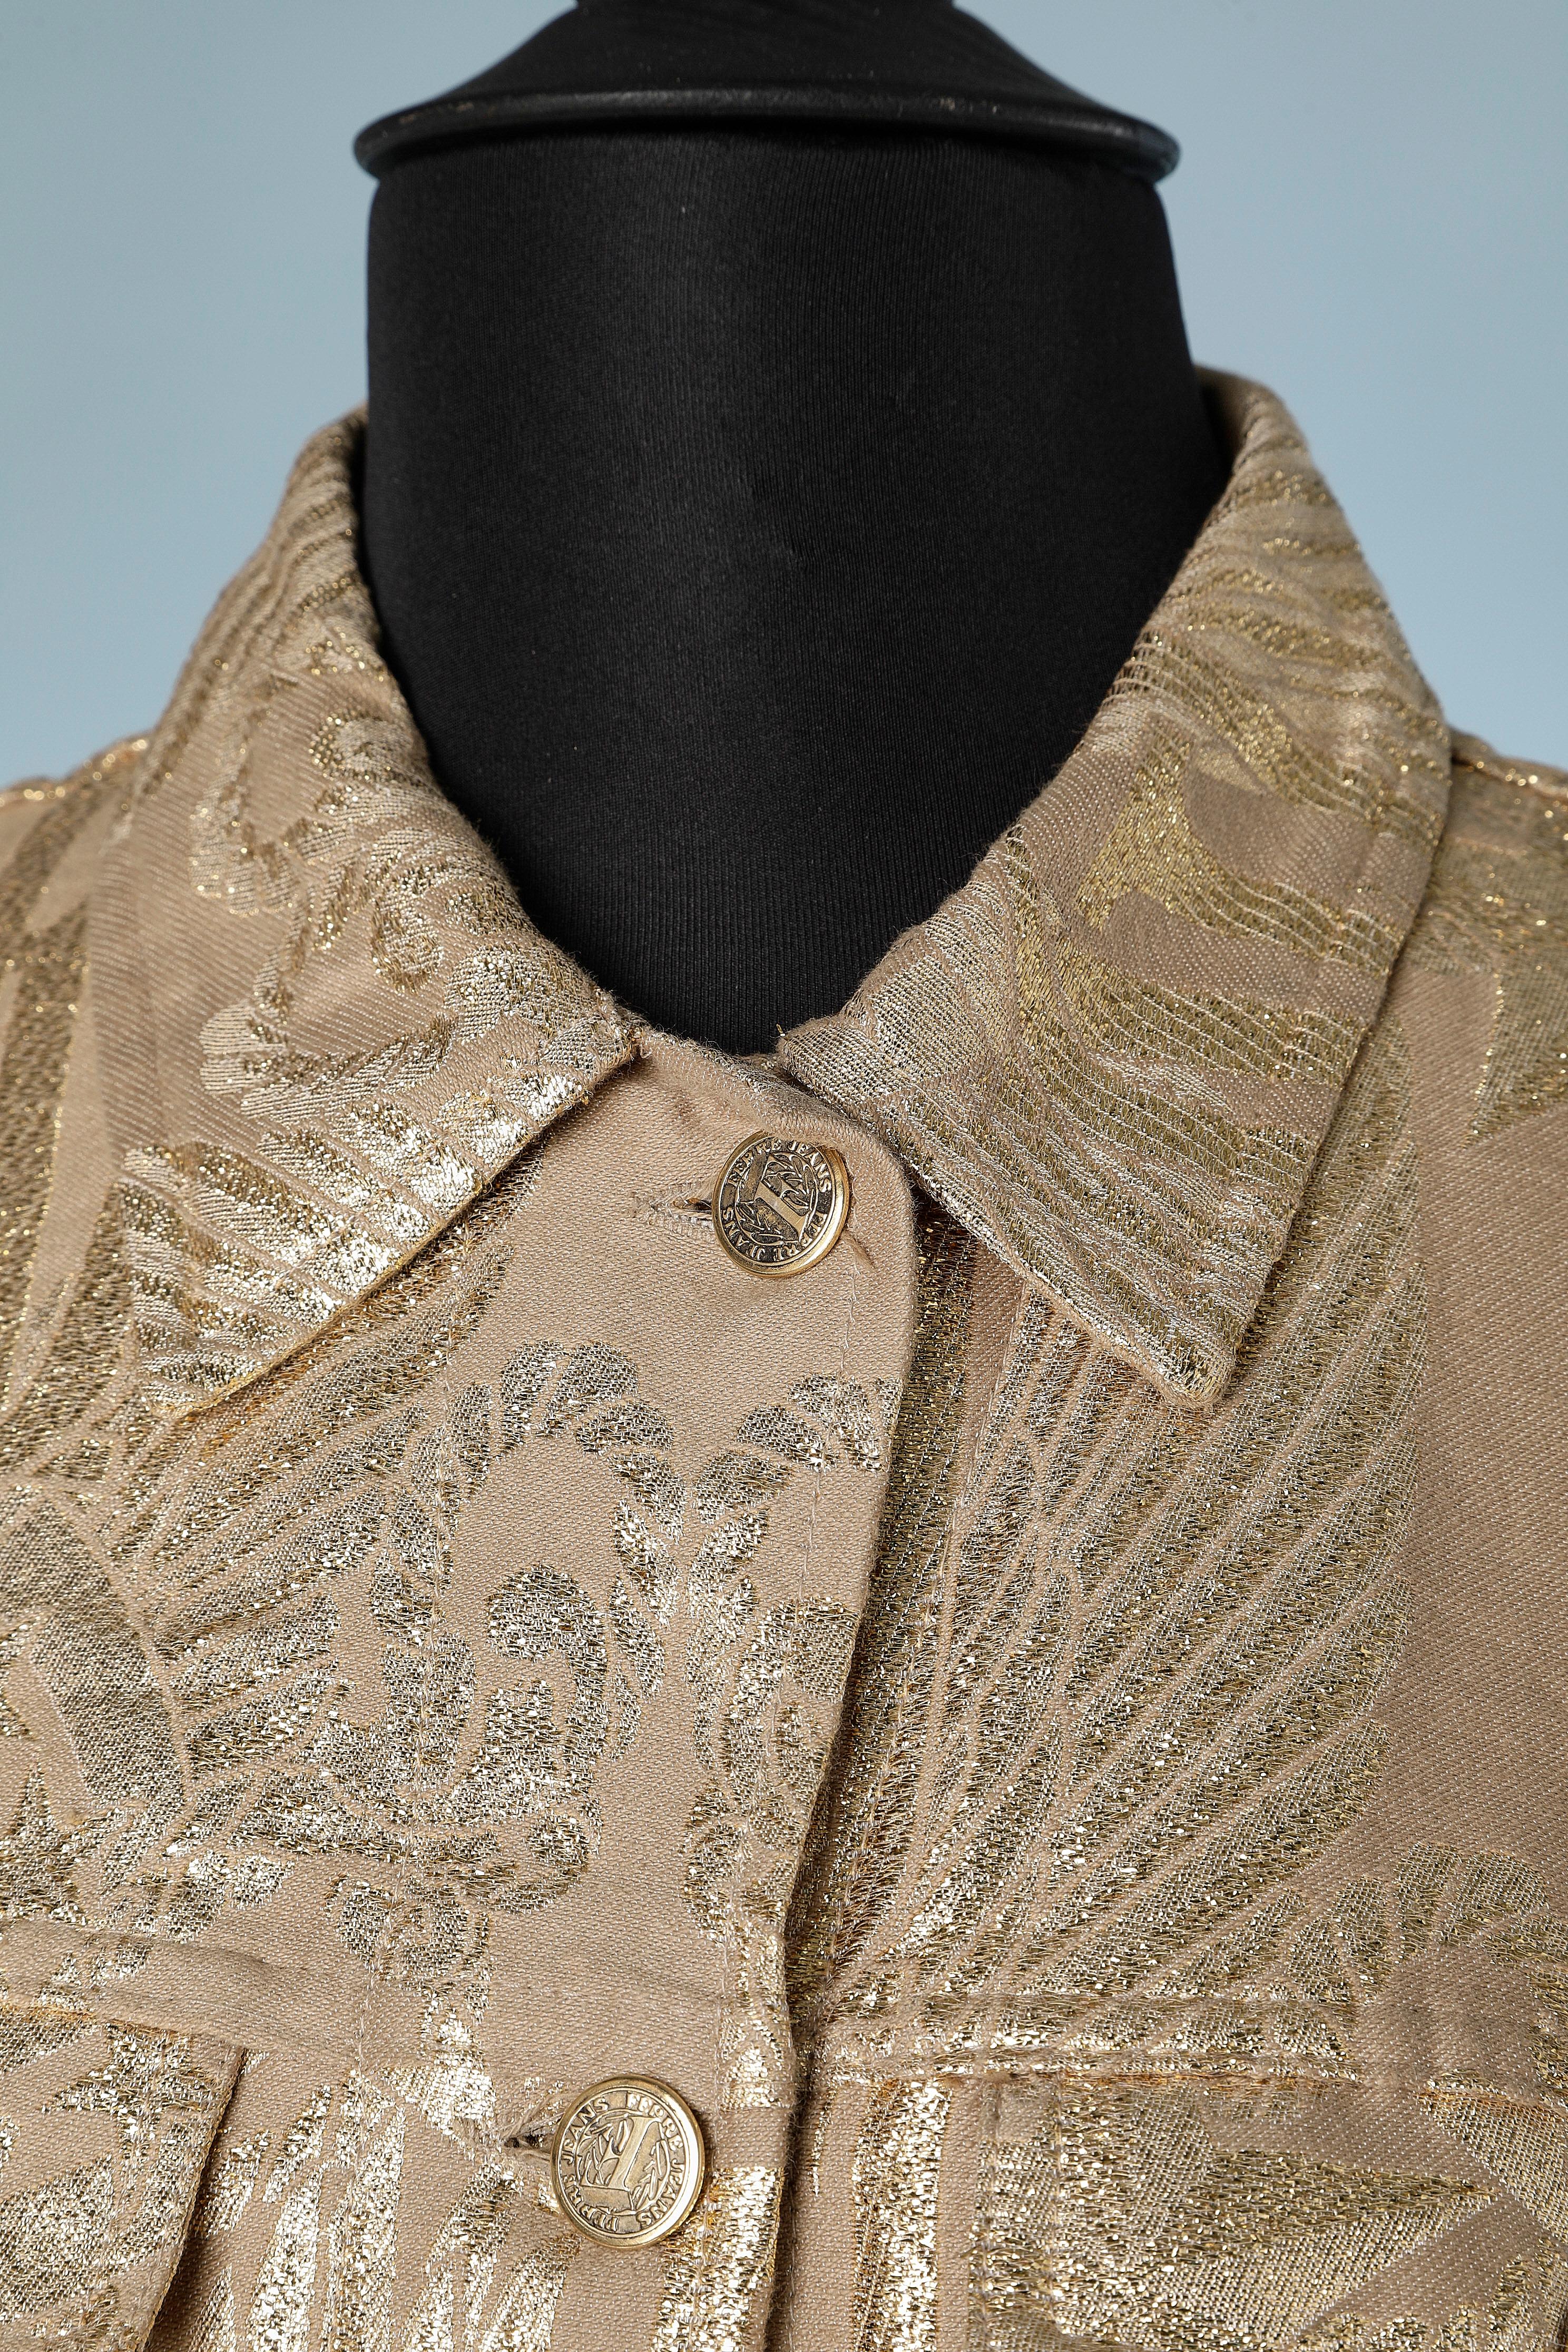 Gold lurex brocade single breasted jacket. No lining. Branded buttons.
SIZE M